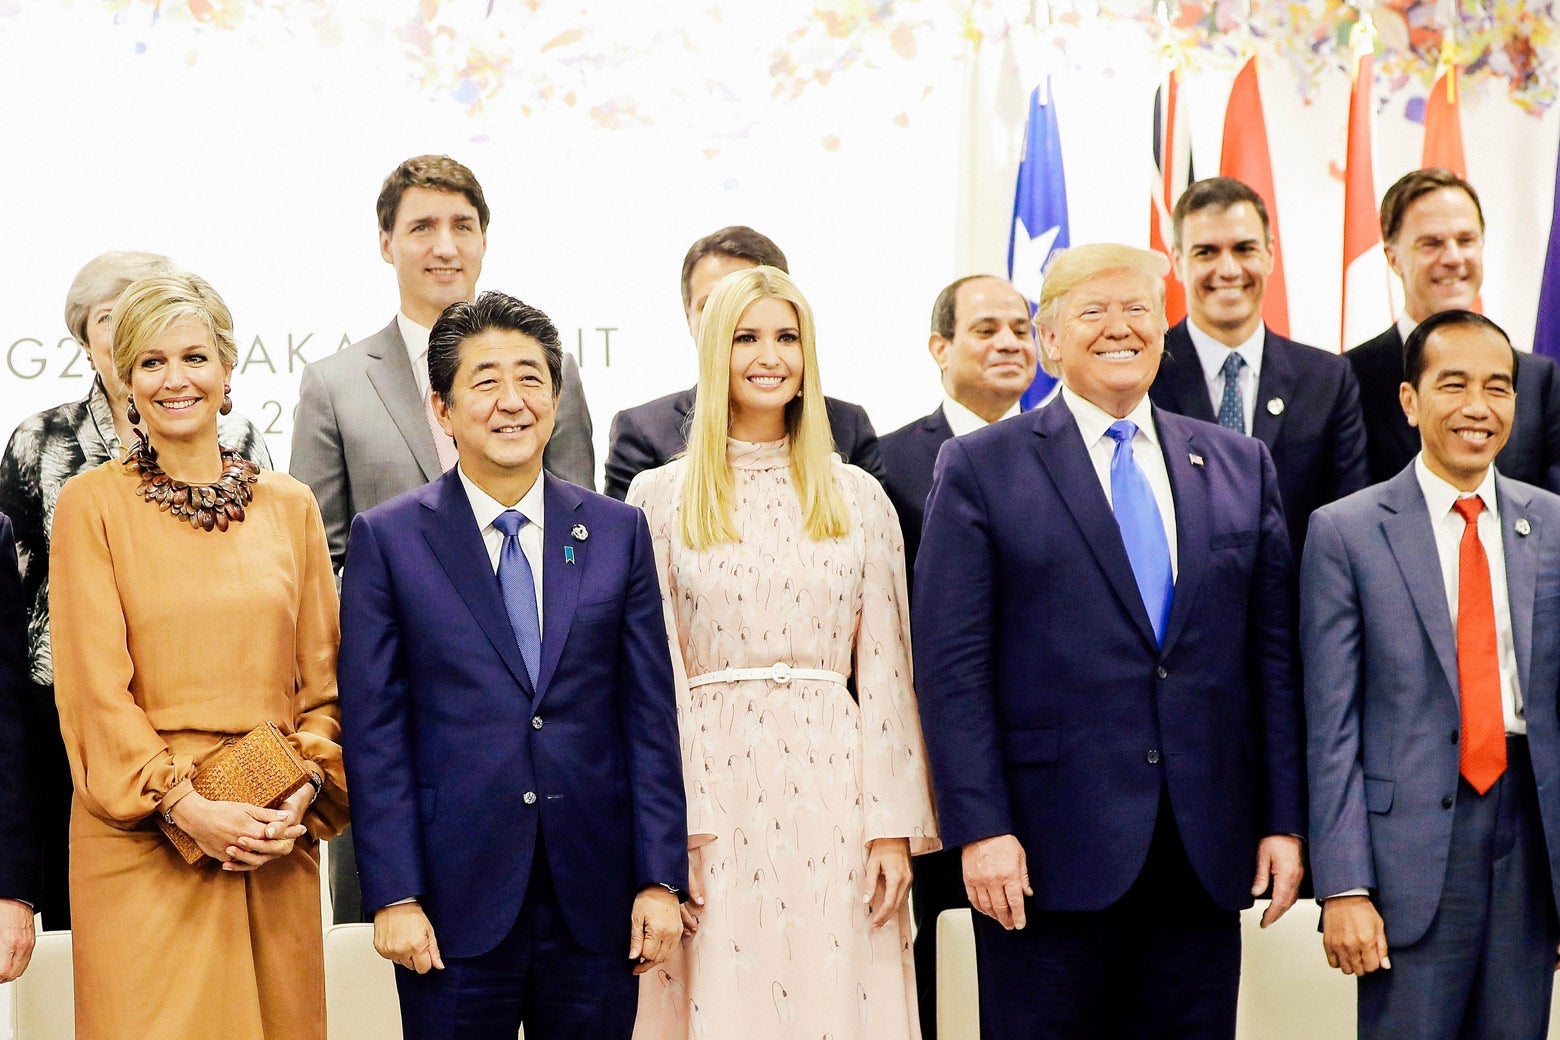 Netherlands Queen Máxima, Canadian Prime Minister Justin Trudeau, Japanese Prime Minister Shinzō Abe, adviser to the U.S. president Ivanka Trump, U.S. President Donald Trump, and Indonesian President Joko Widodo pose for a photo at the G-20 summit.